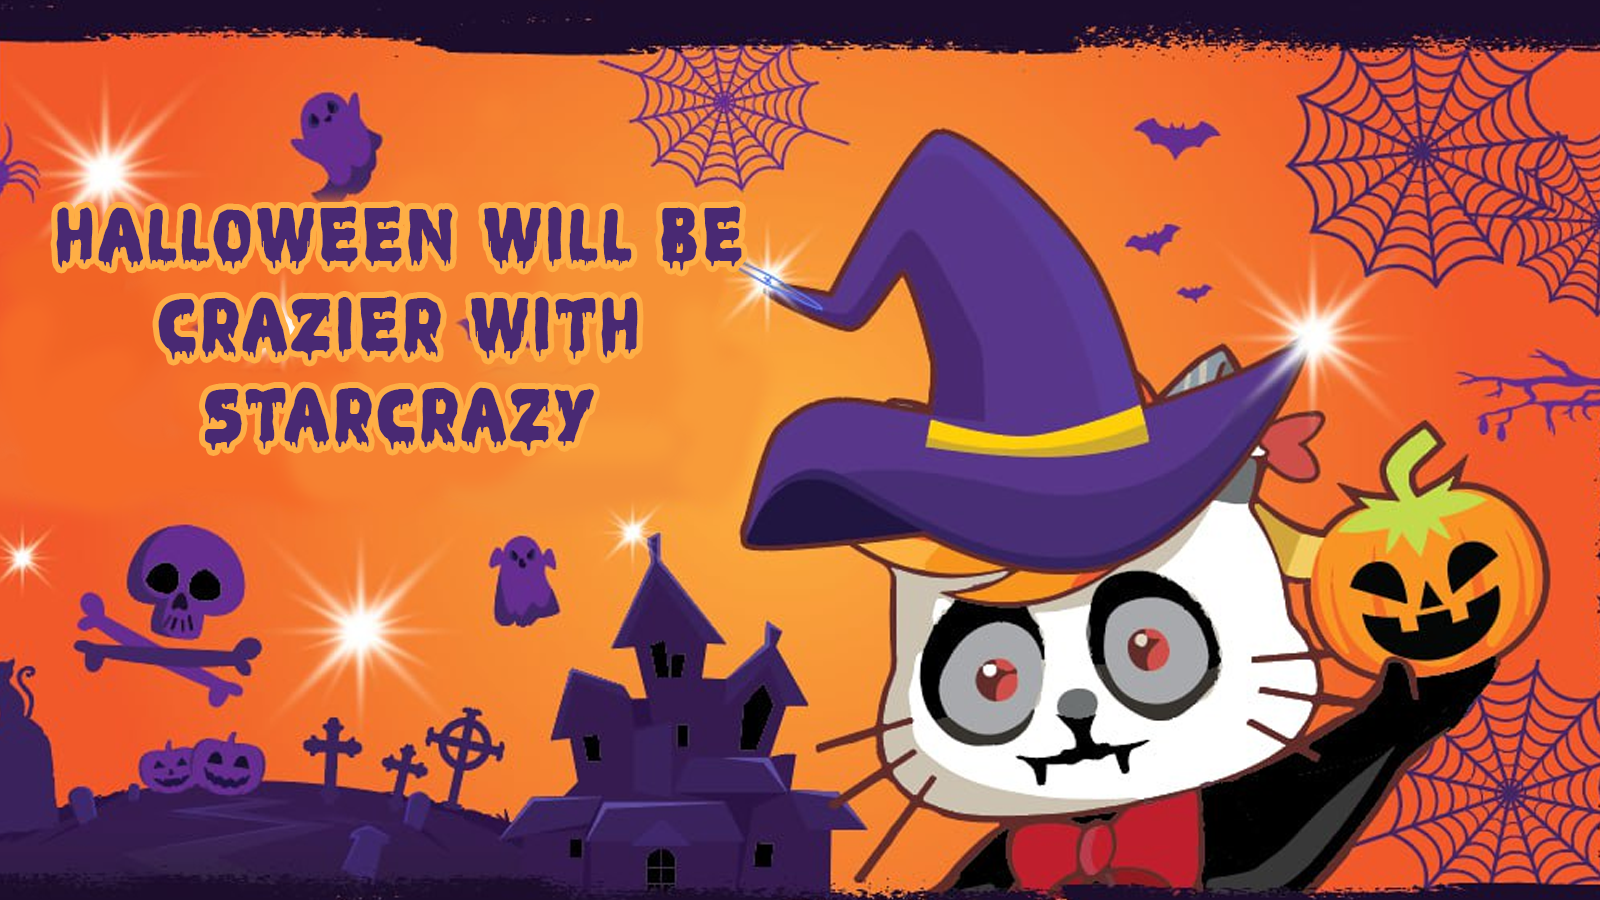 This Halloween Will Be Crazier With StarCrazy